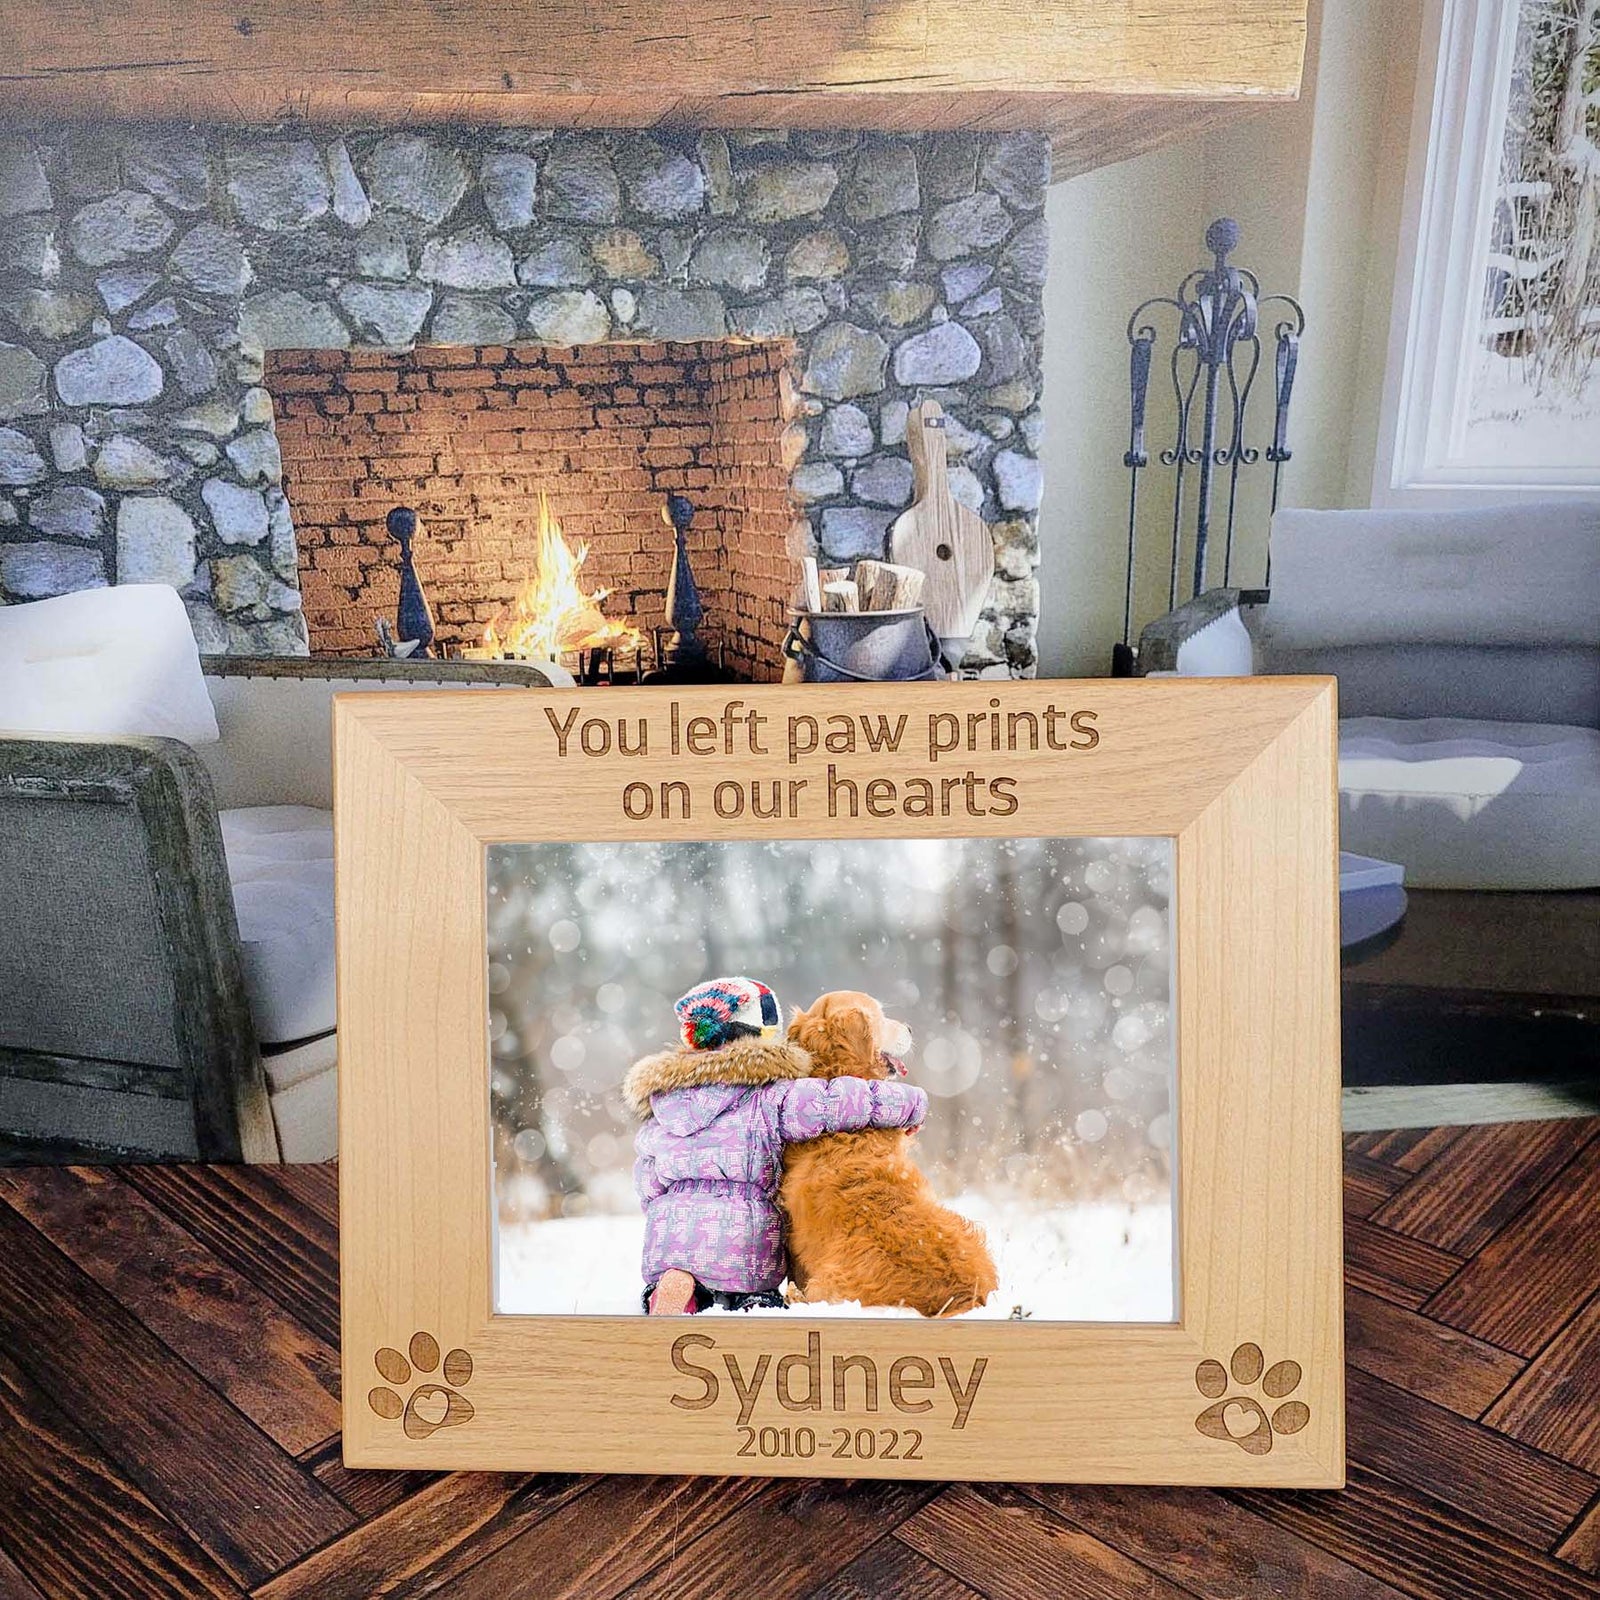 Pawprints Left By You Pet Memorial Wall Plaque 5x7 